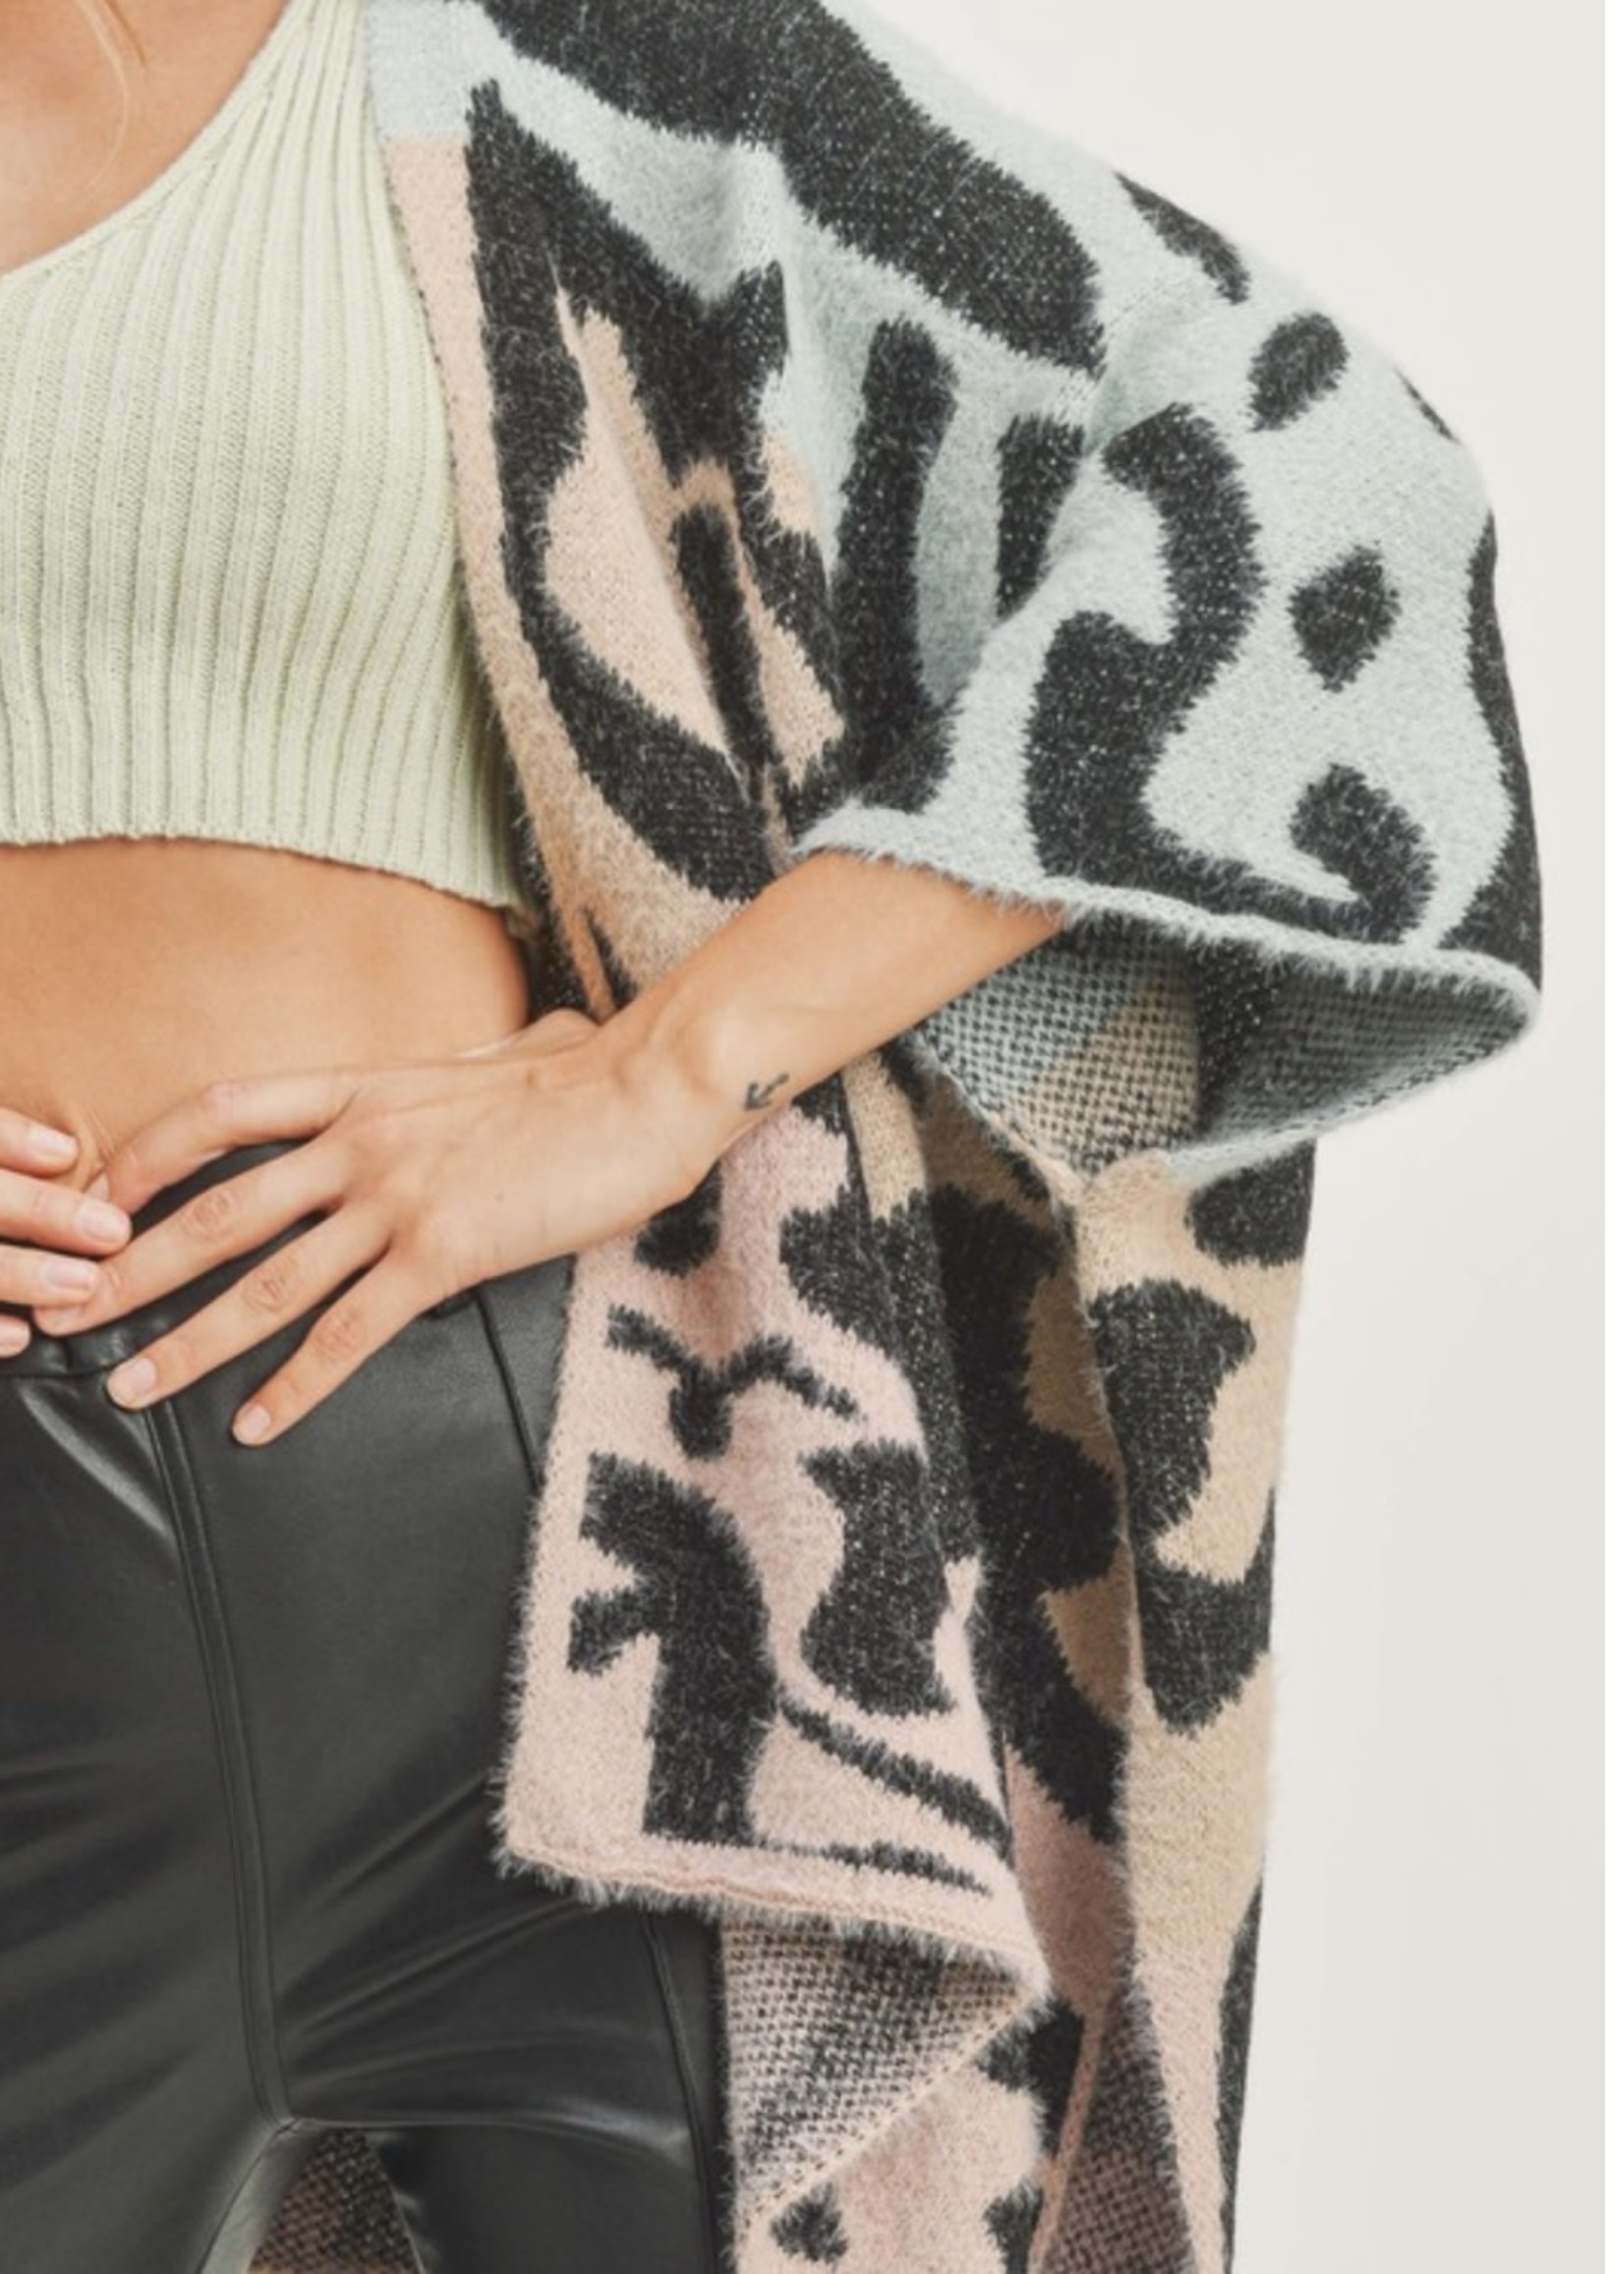 Eyes on You Ombre Poncho Cardigan